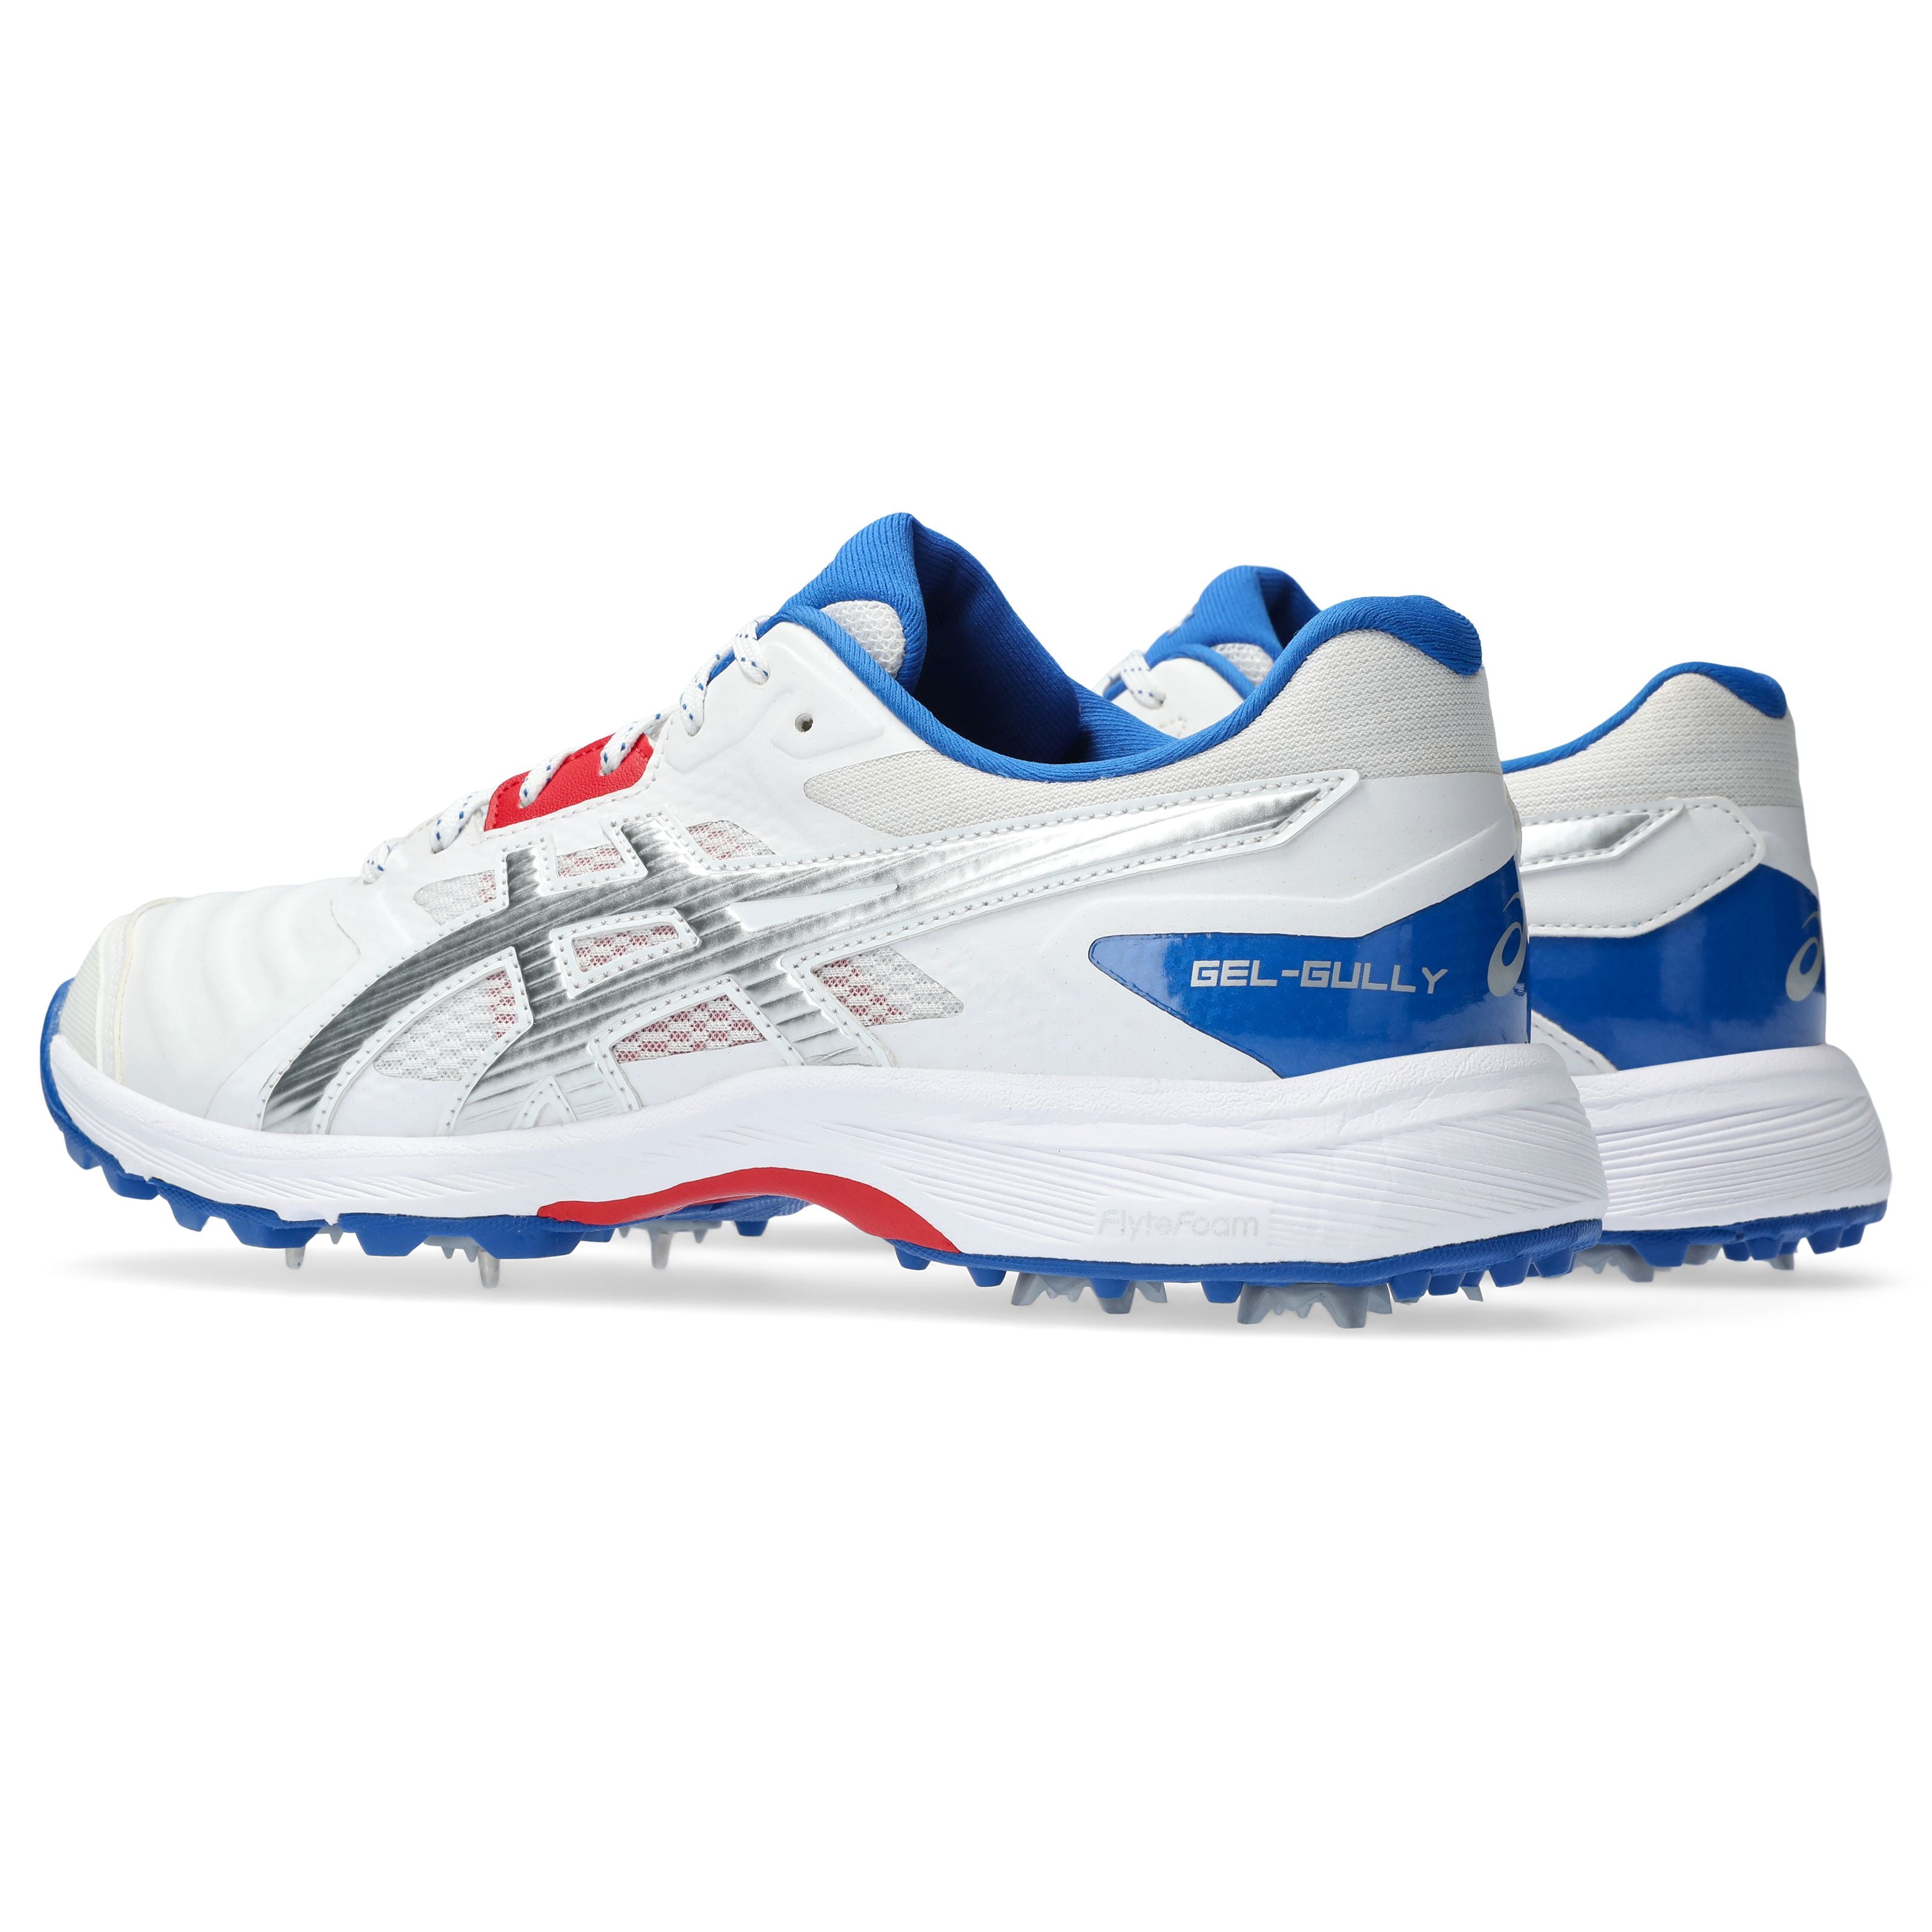 Asics Gel Gully 7 Steel Spikes Cricket Shoes